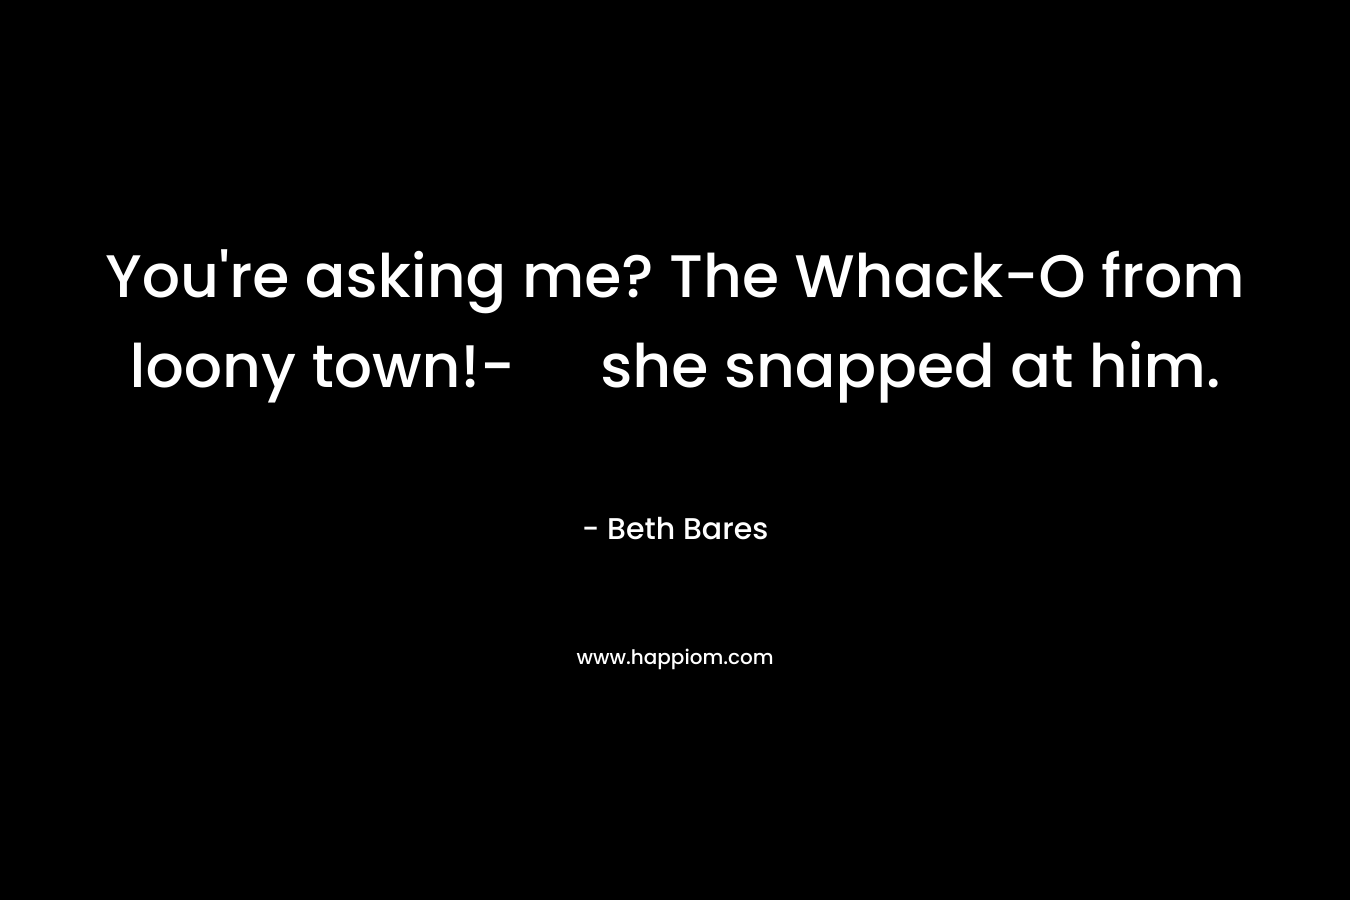 You’re asking me? The Whack-O from loony town!- she snapped at him. – Beth Bares